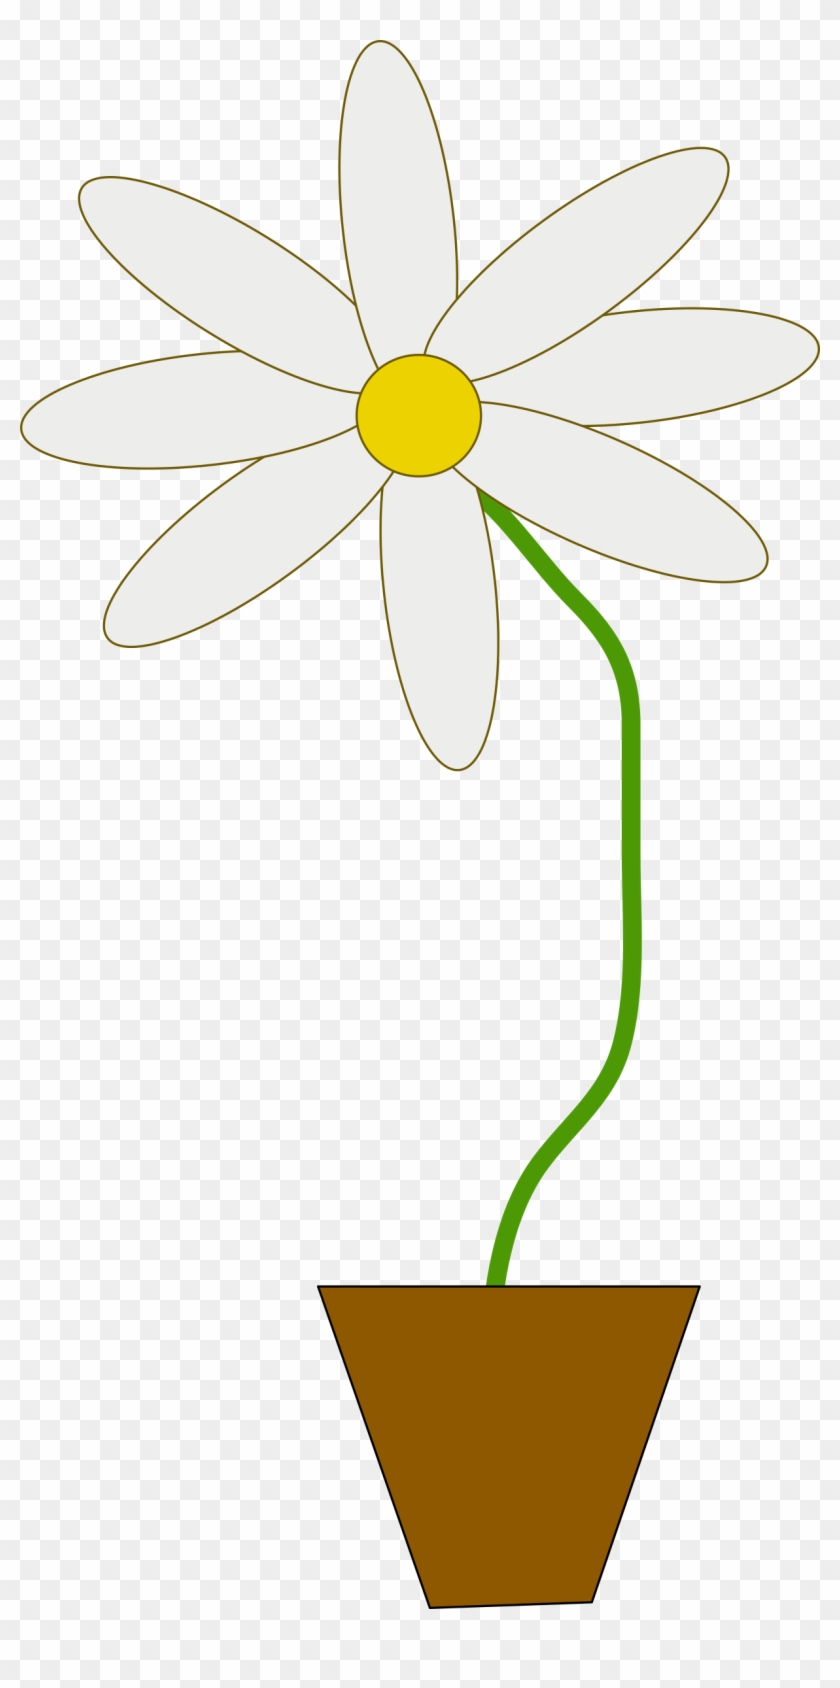 This Free Icons Png Design Of Flower In A Pot - Flower In Pot Clip Art Transparent Png #2299812